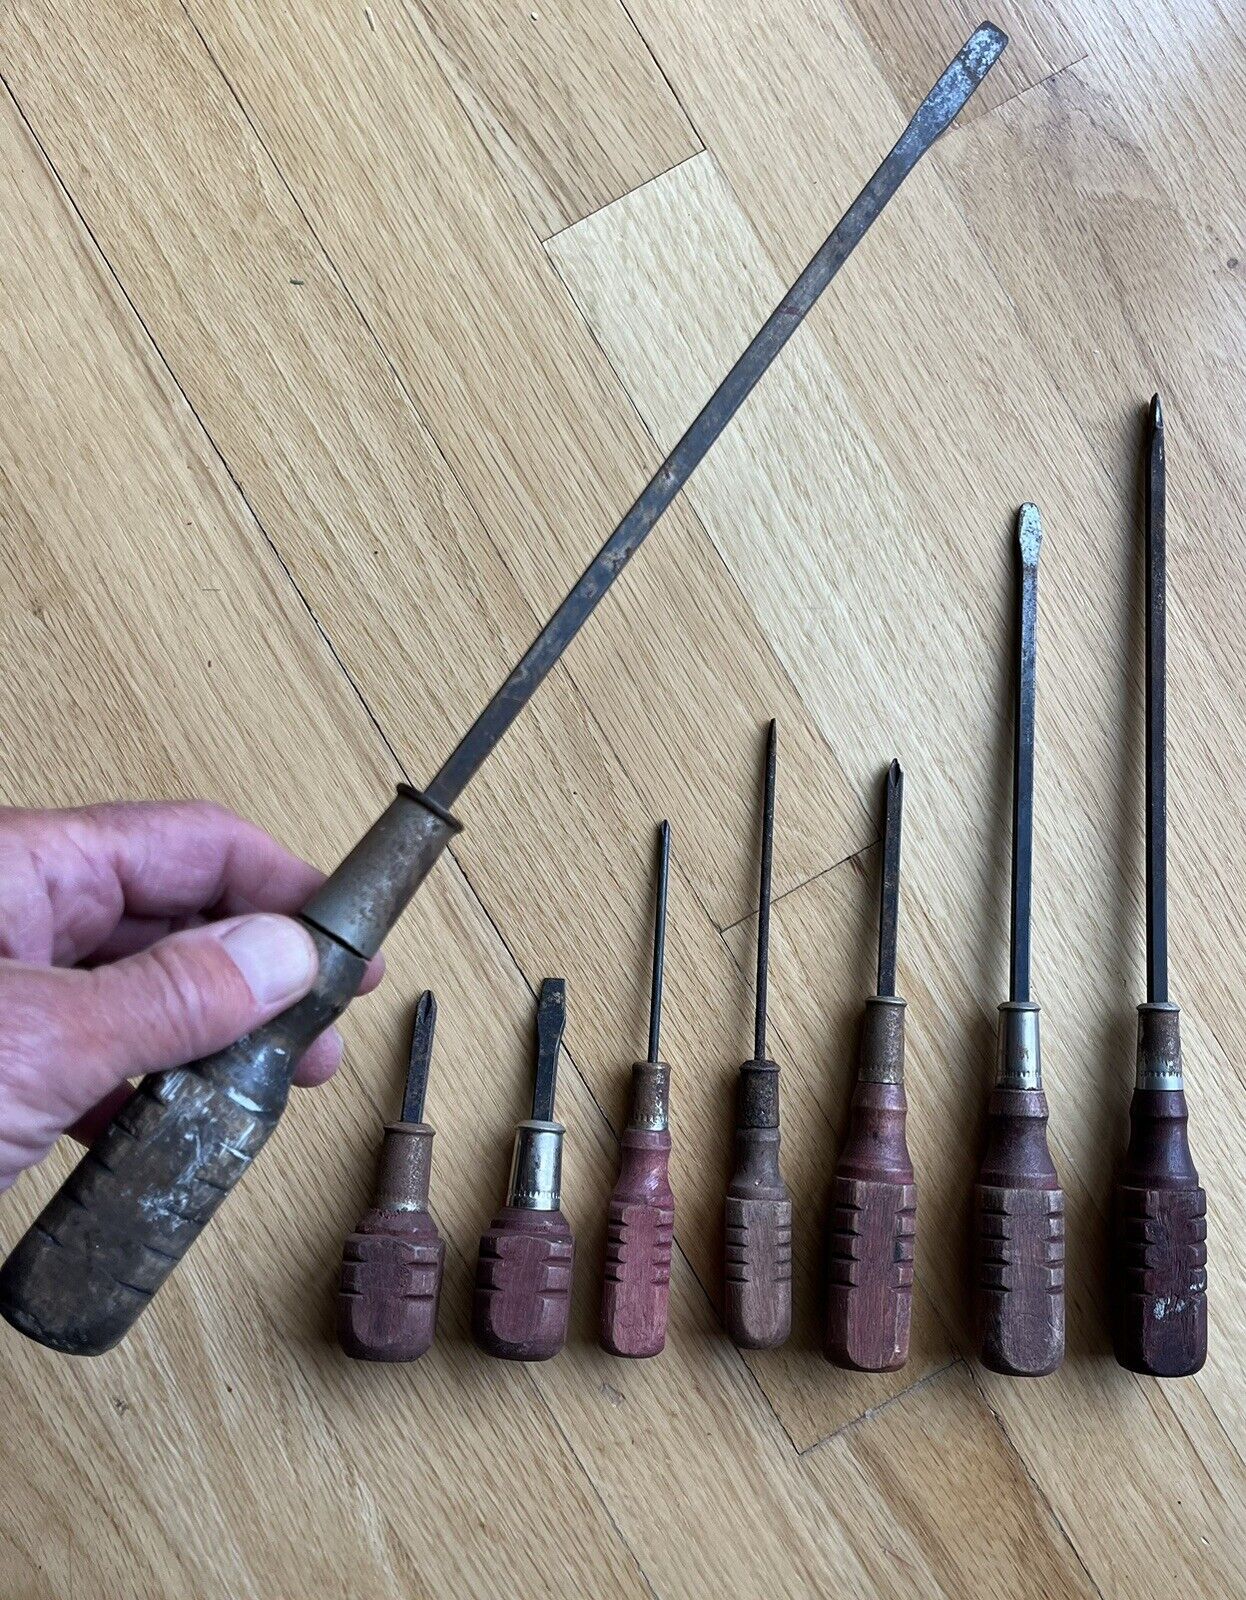 Lot of 8 Retro Rusty Vintage Wood Handle Screwdriver Phillips and Flathead 